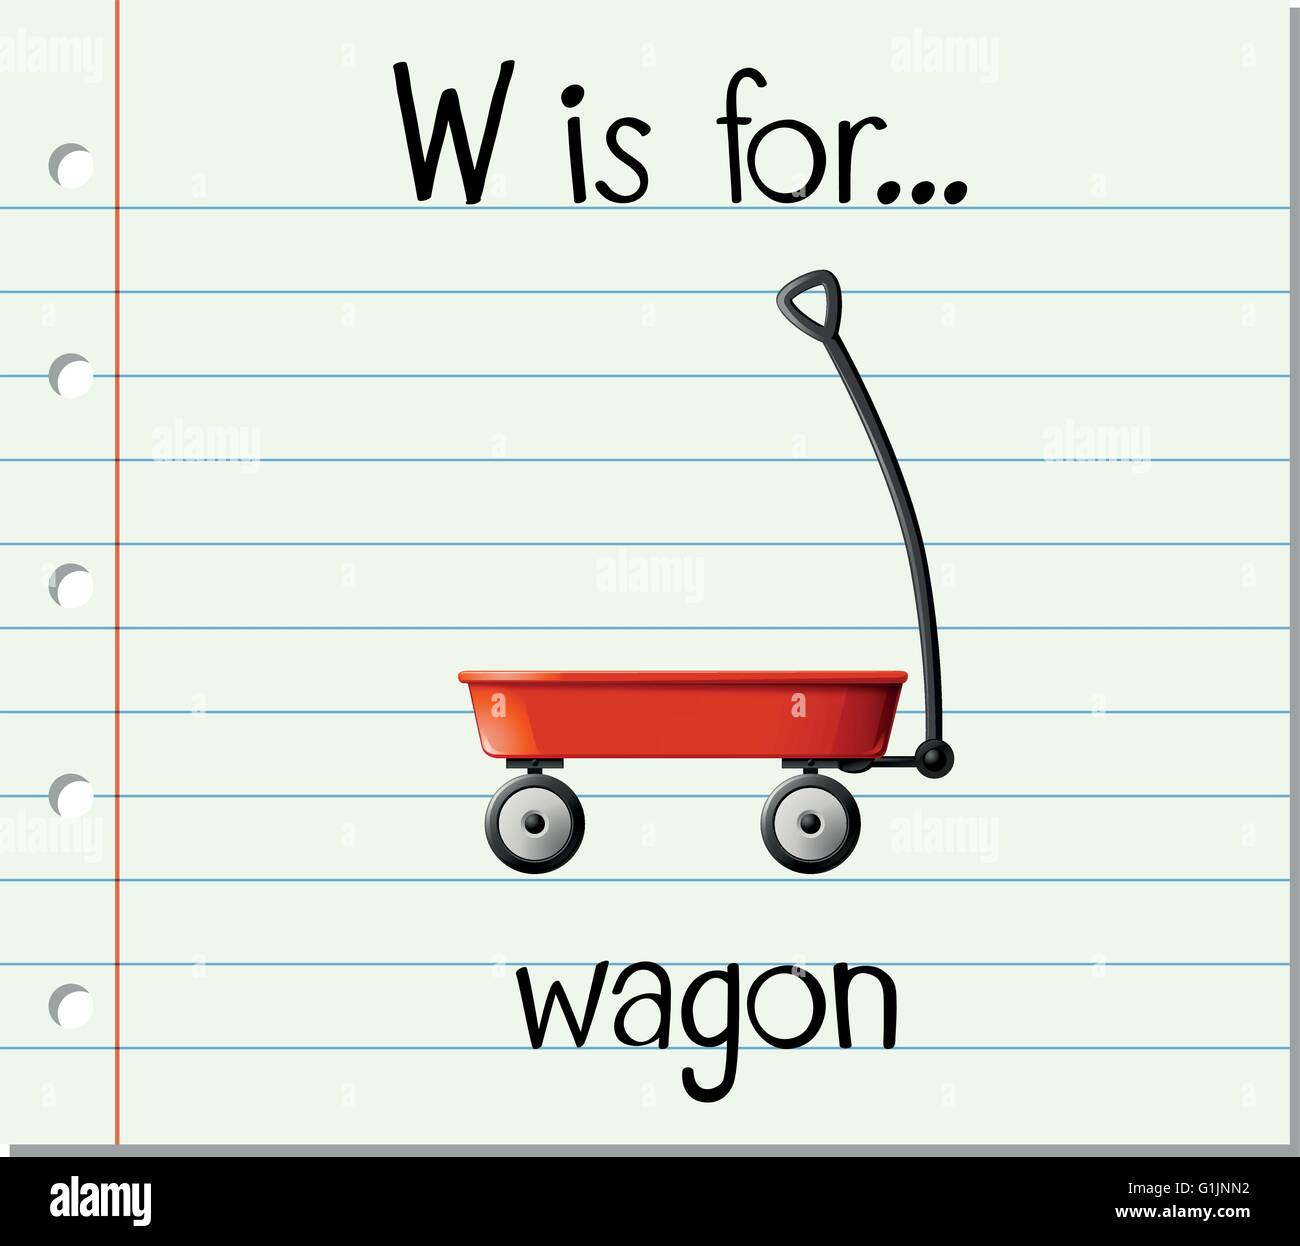 Flashcard letter W is for wagon illustration Stock Vector